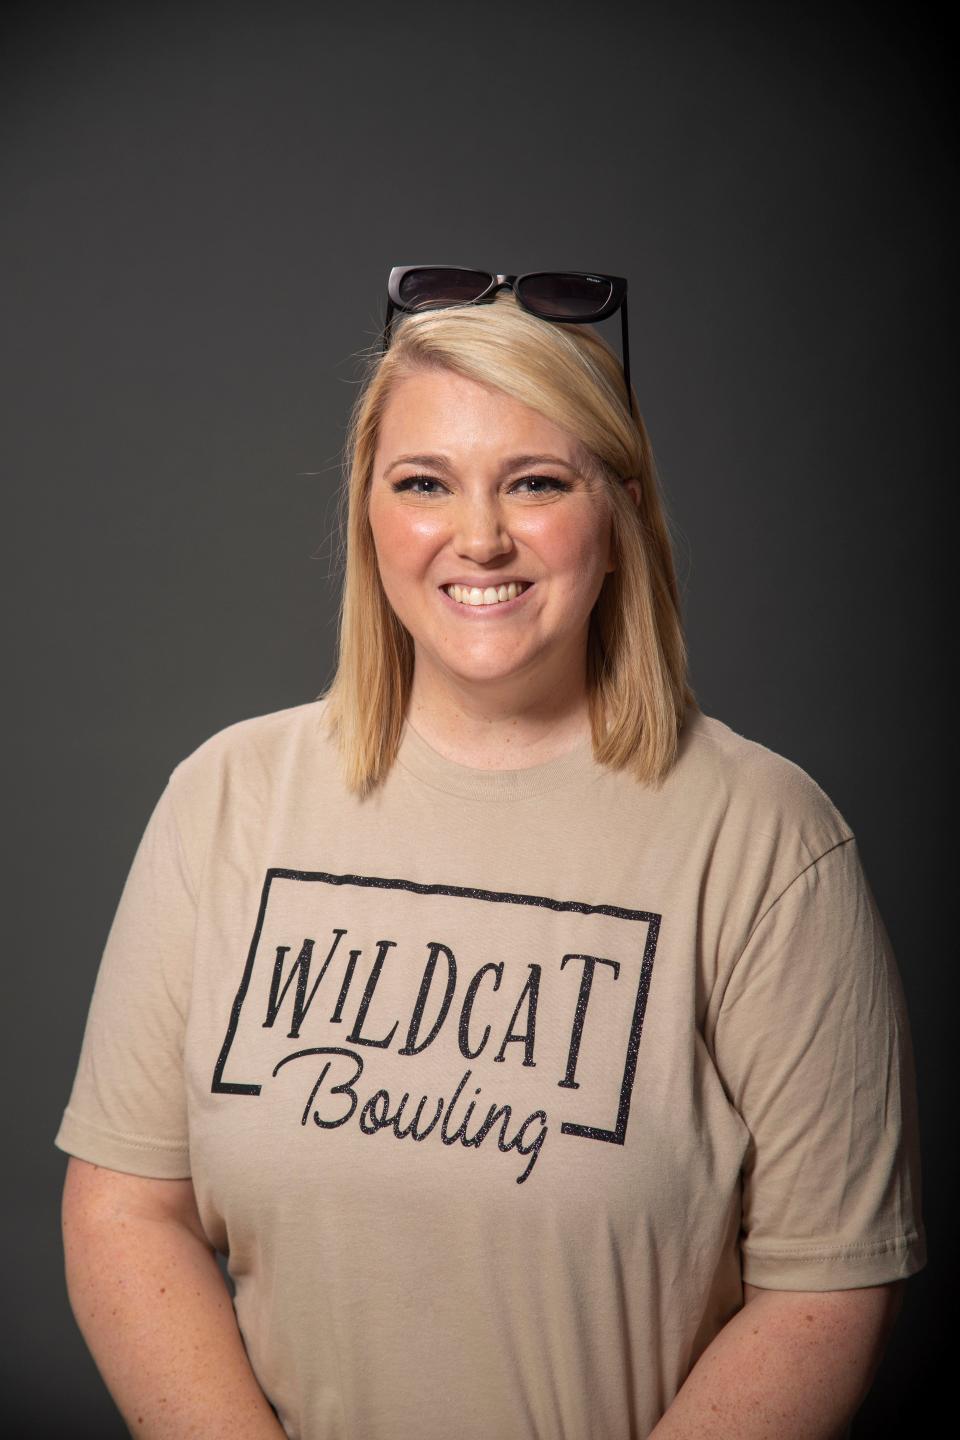 Oak Ridge High School math teacher Julianne Fowler, who helped coach bowling at South-Doyle High School, pushed to add the sport at ORHS and is the first ORHS bowling coach.